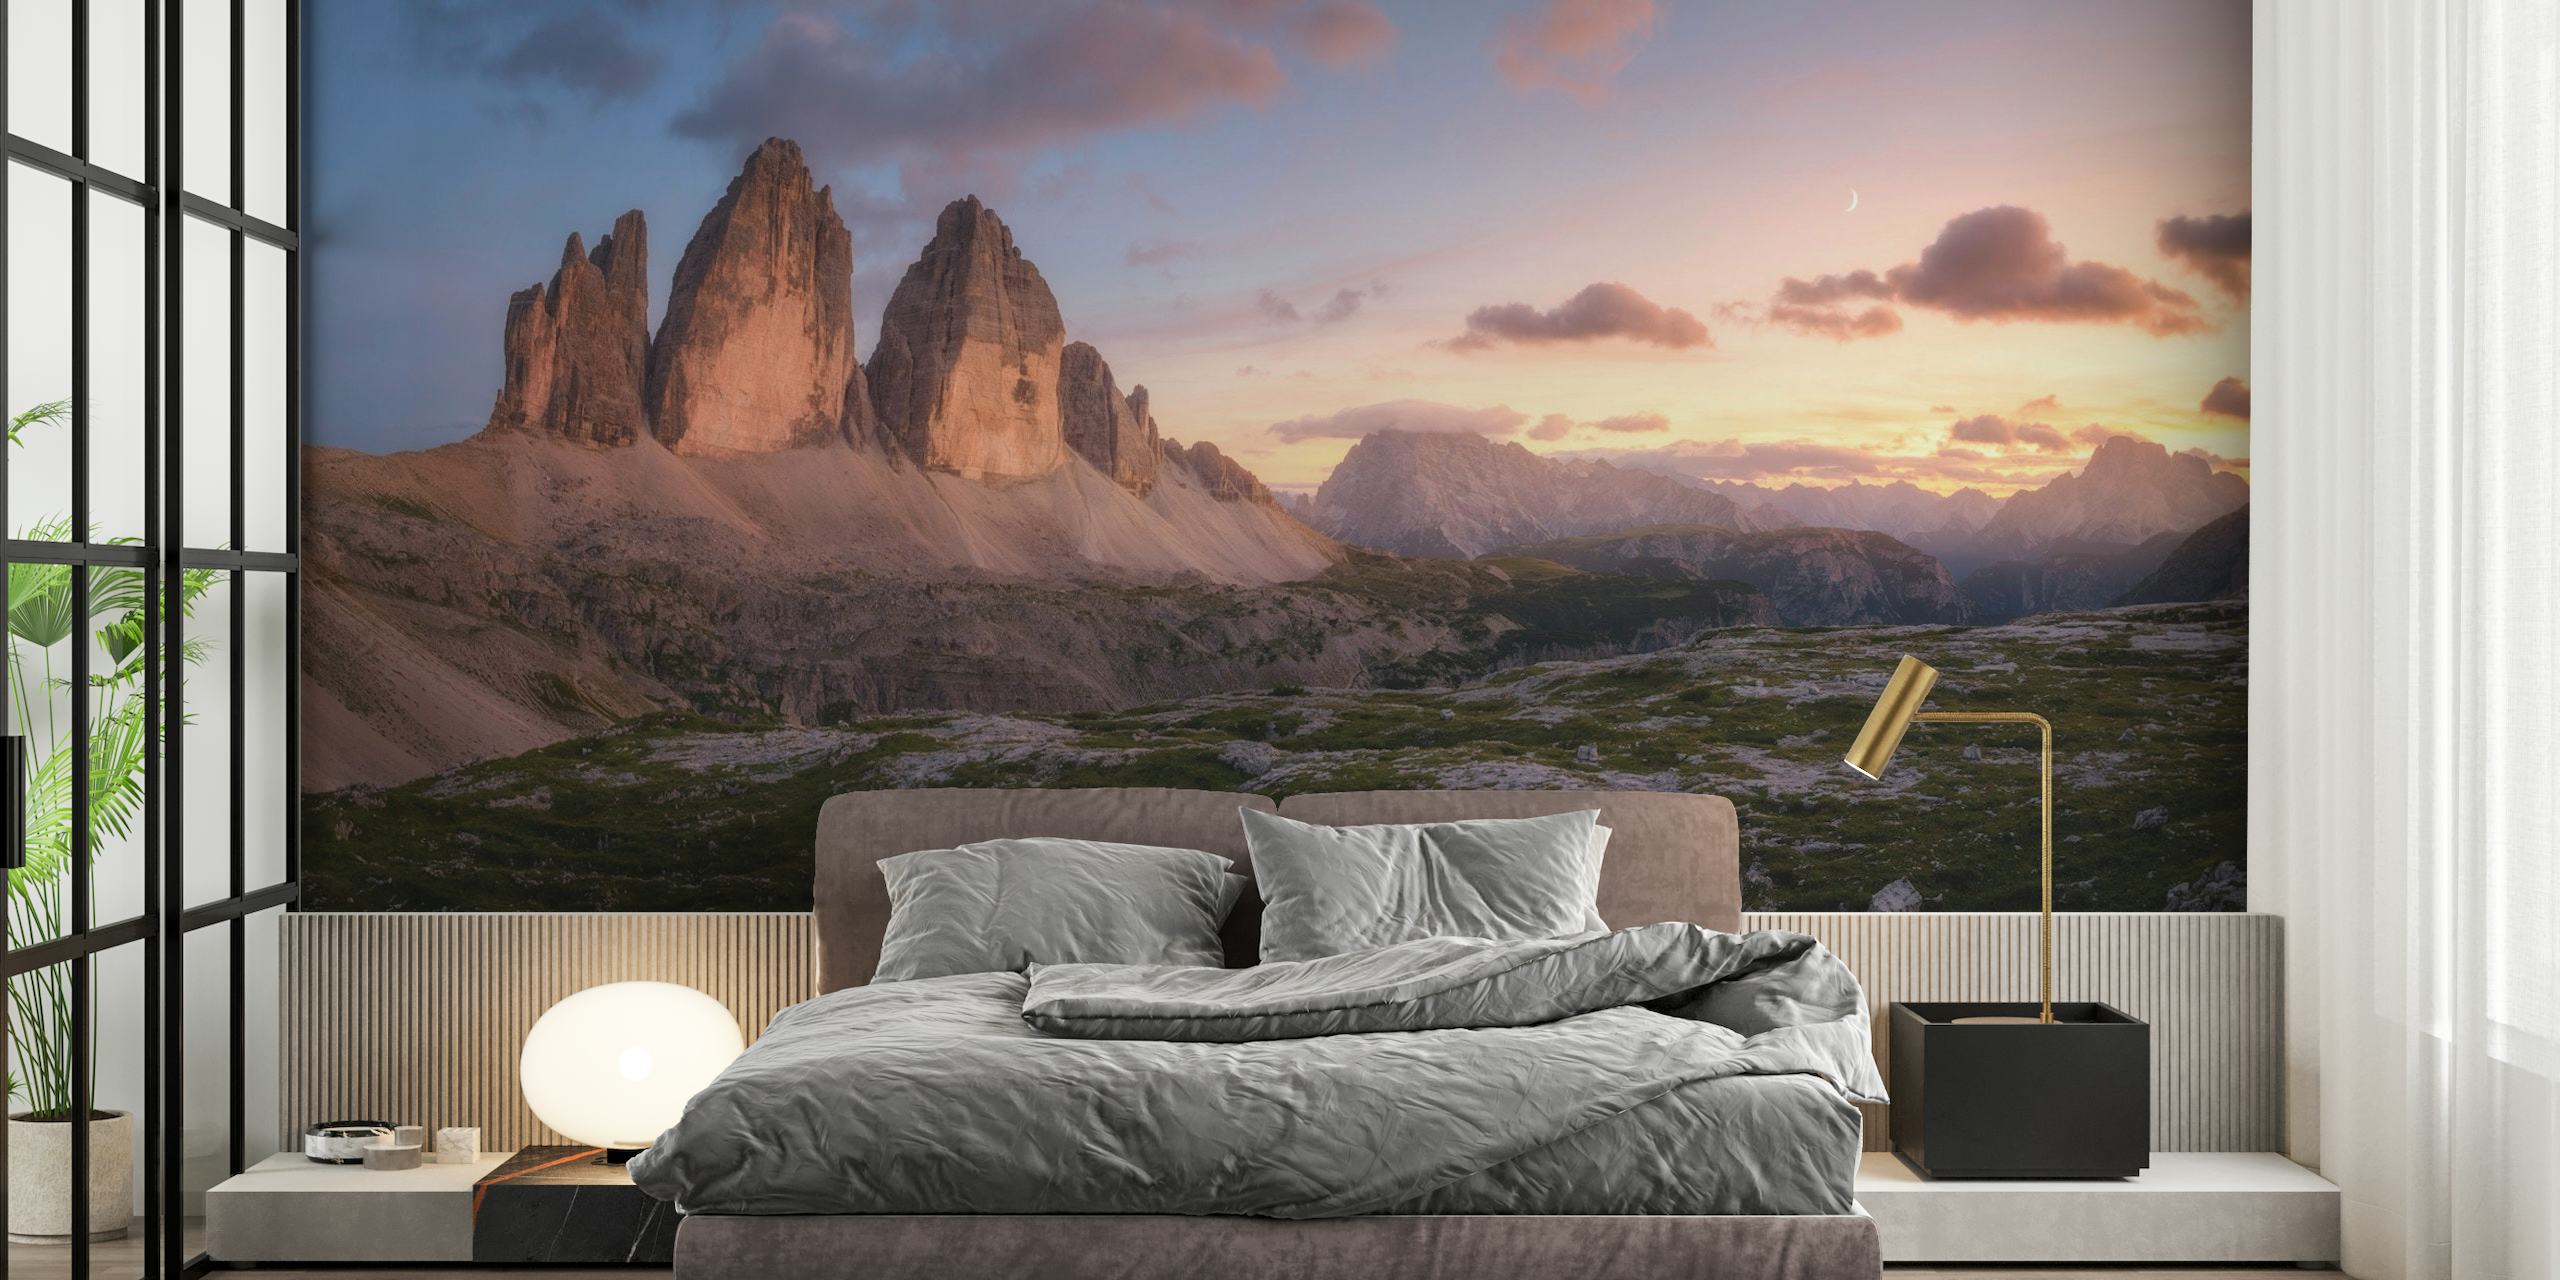 An Evening in the Dolomites wallpaper